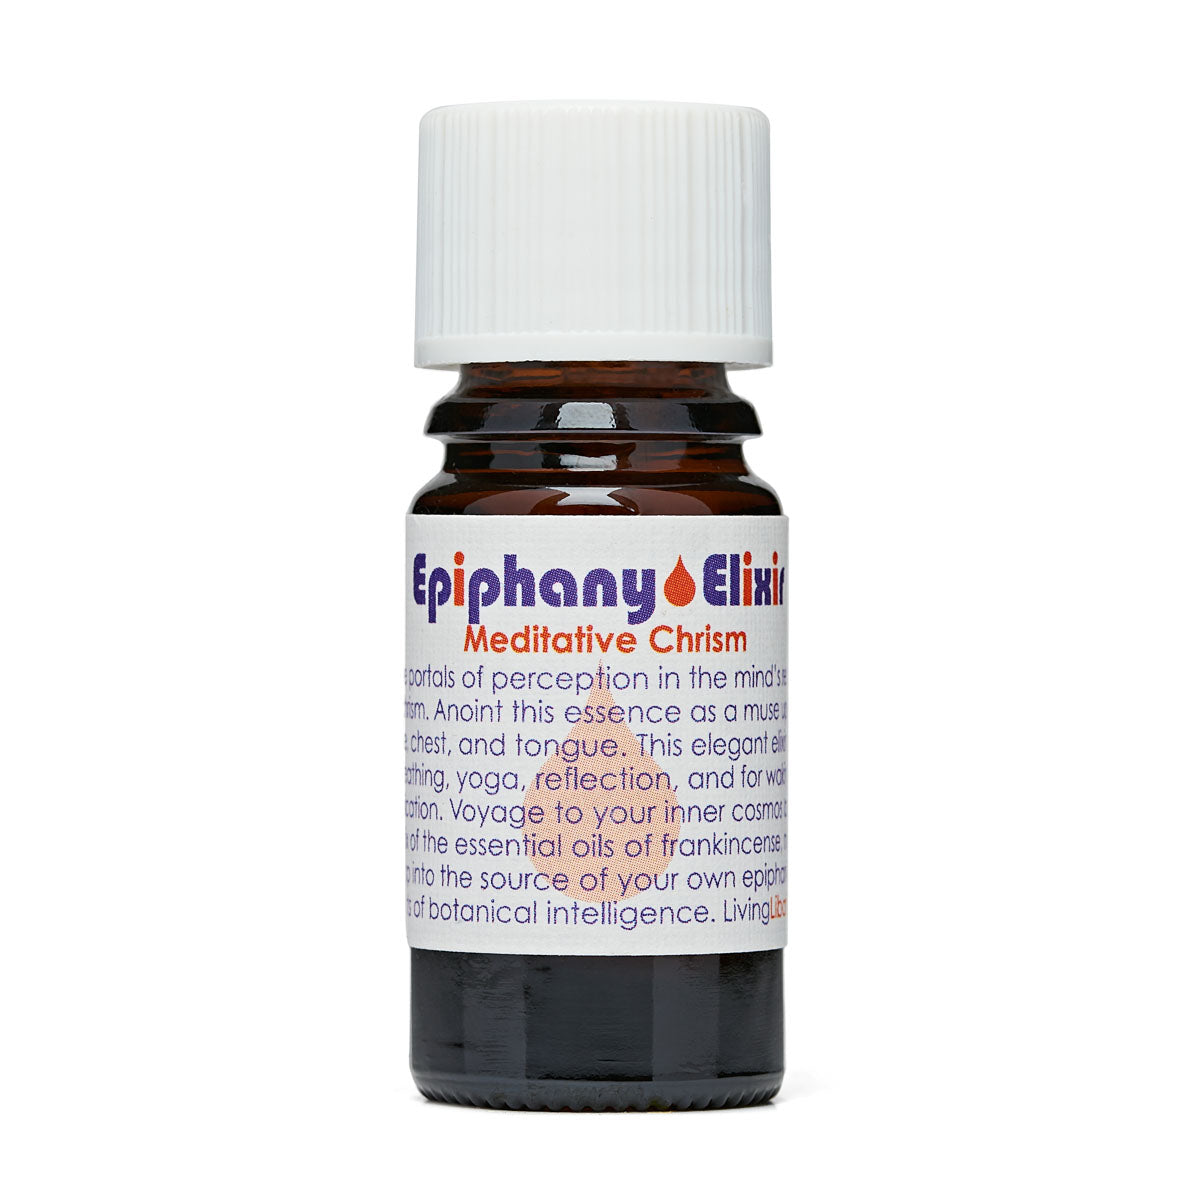 Epiphany Elixir | Living Libations | Raw Living UK | Health Nectar | Living Libations Epiphany Elixir: a fortifying chrism to bring clarity. Made with Golden Rod, Frankincense &amp; Myrrh. Use for Breathing, Yoga &amp; Meditation.